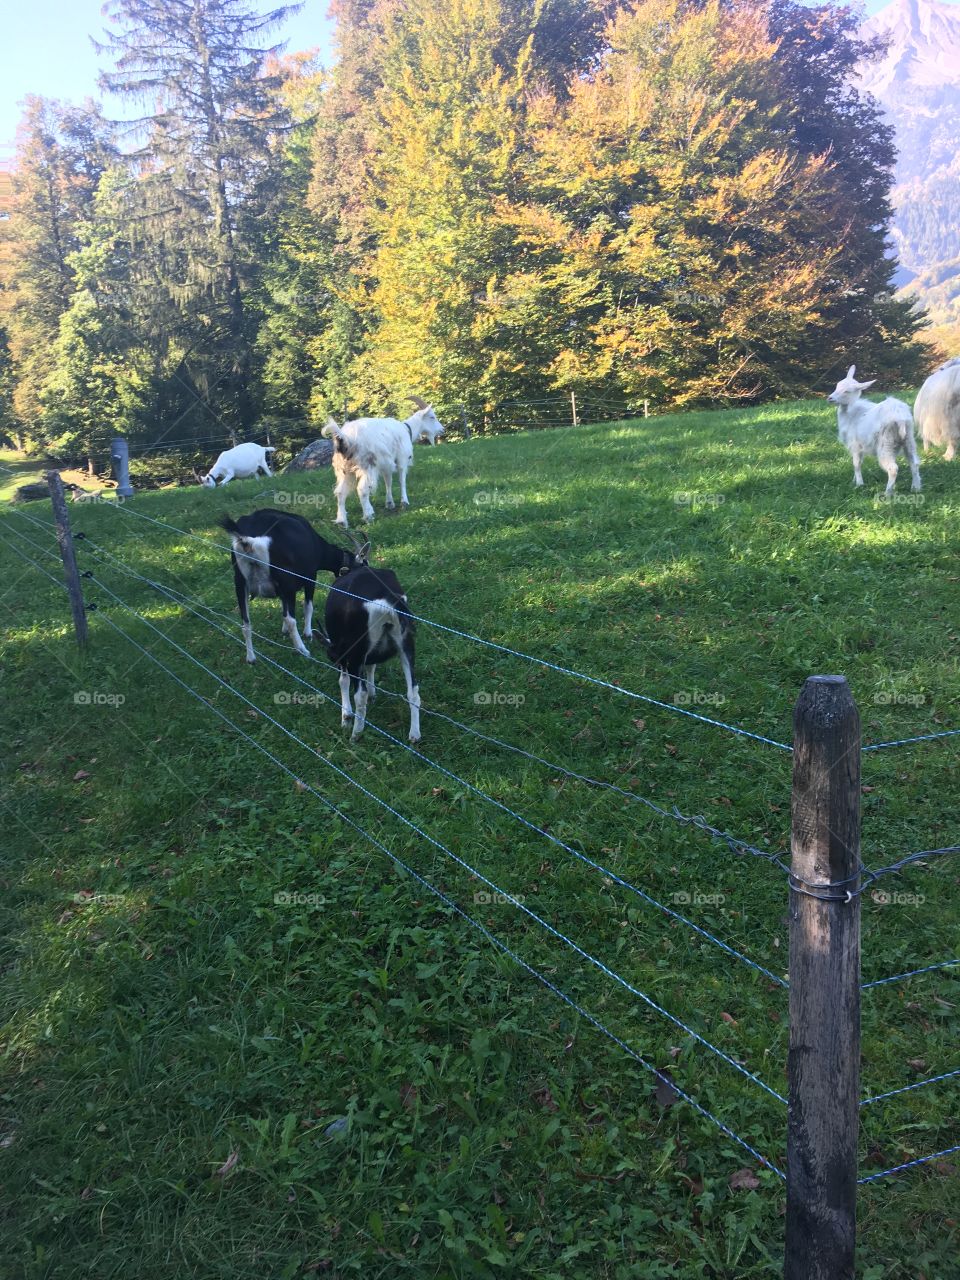 Goats grazing in a fenced off field.